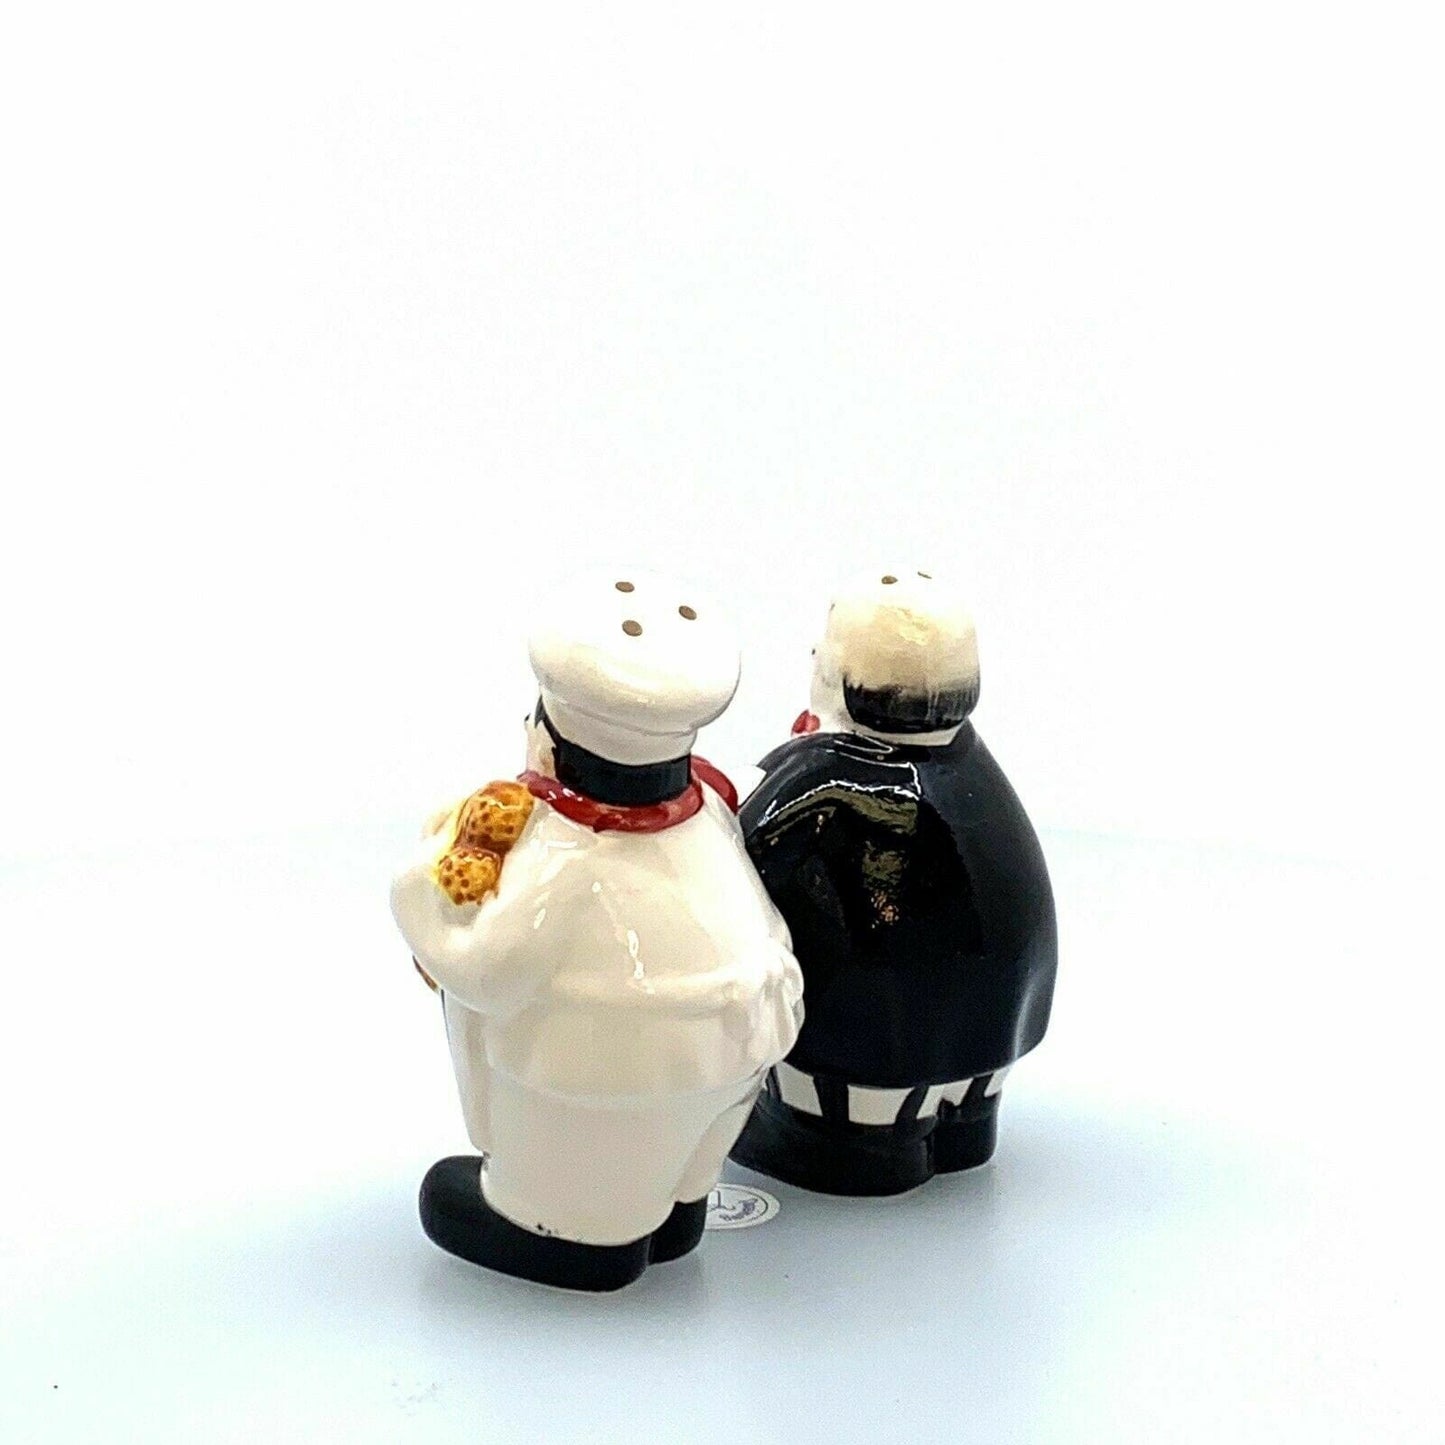 Vintage Giftco Italian Chef & Maitre D' Salt And Pepper Shakers Set Ceramic